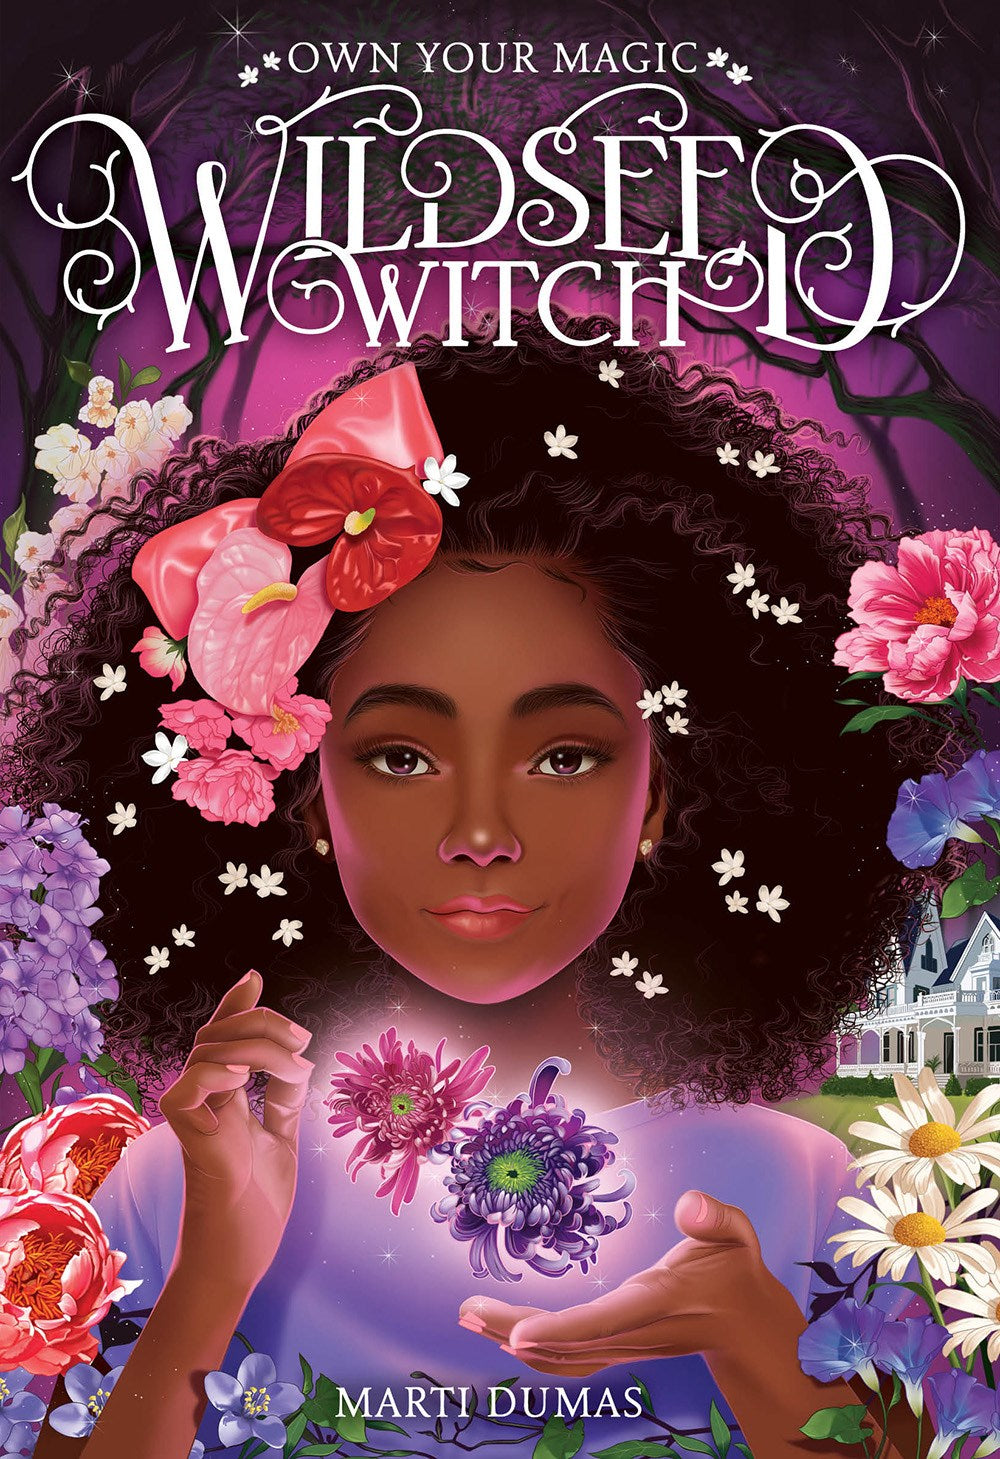 Wildseed Witch (Book 1) by Marti Dumas